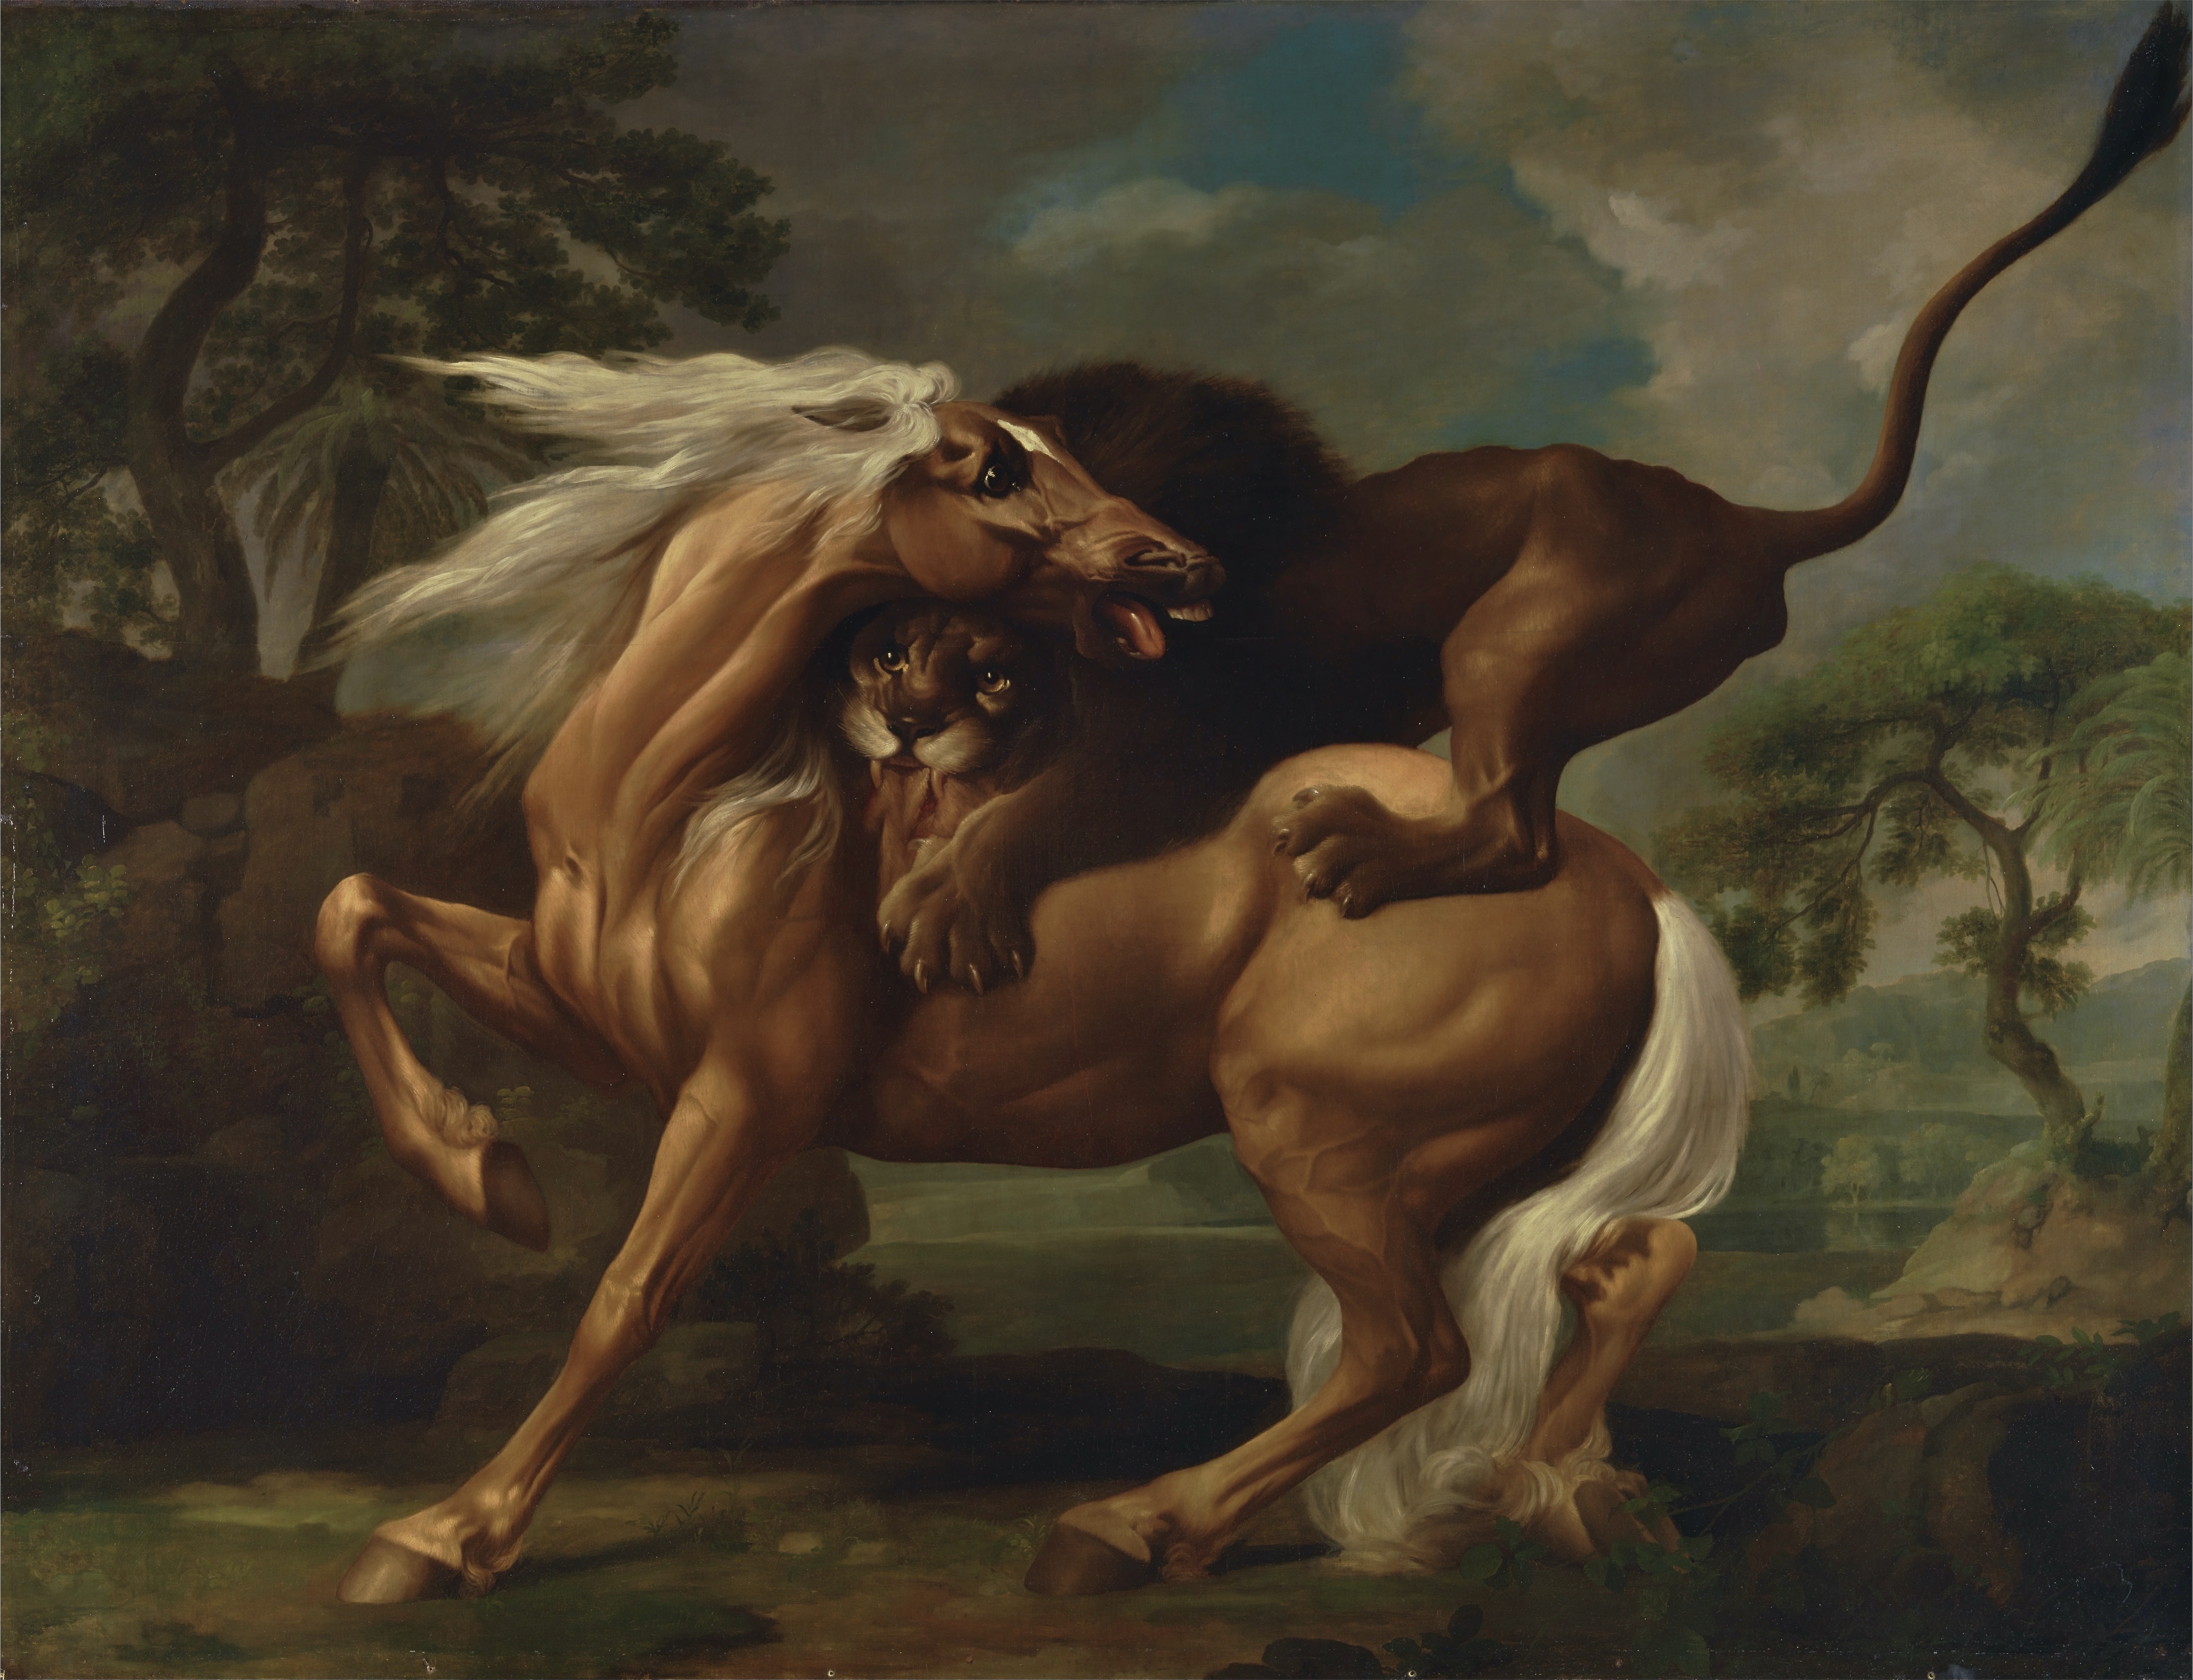 George_Stubbs_-_A_Lion_Attacking_a_Horse_-_Google_Art_Project